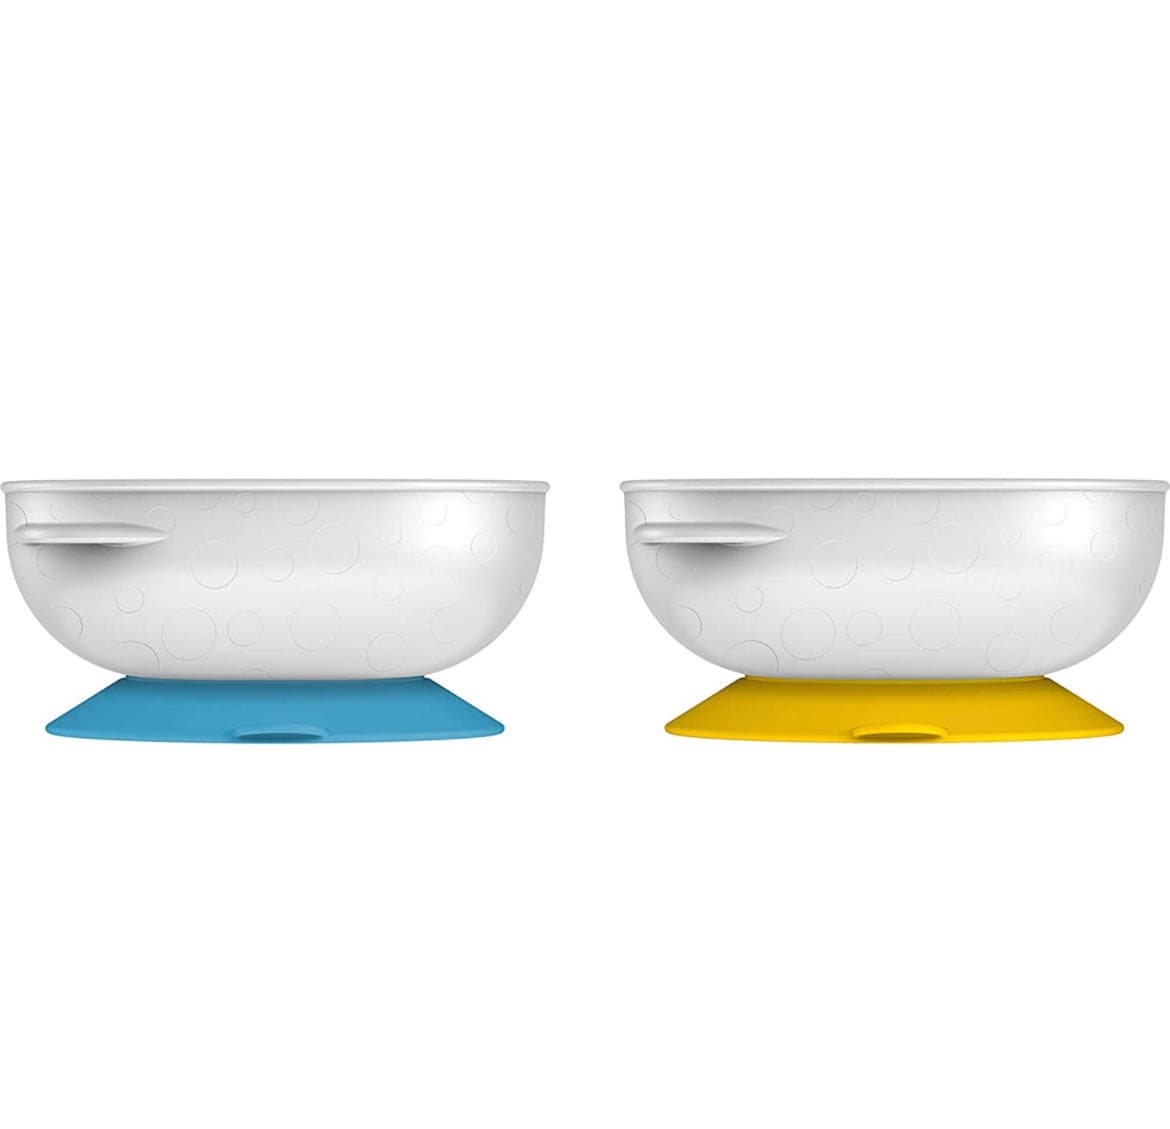 No-Slip Suction Bowl by Dr. Brown, 2-Pack.